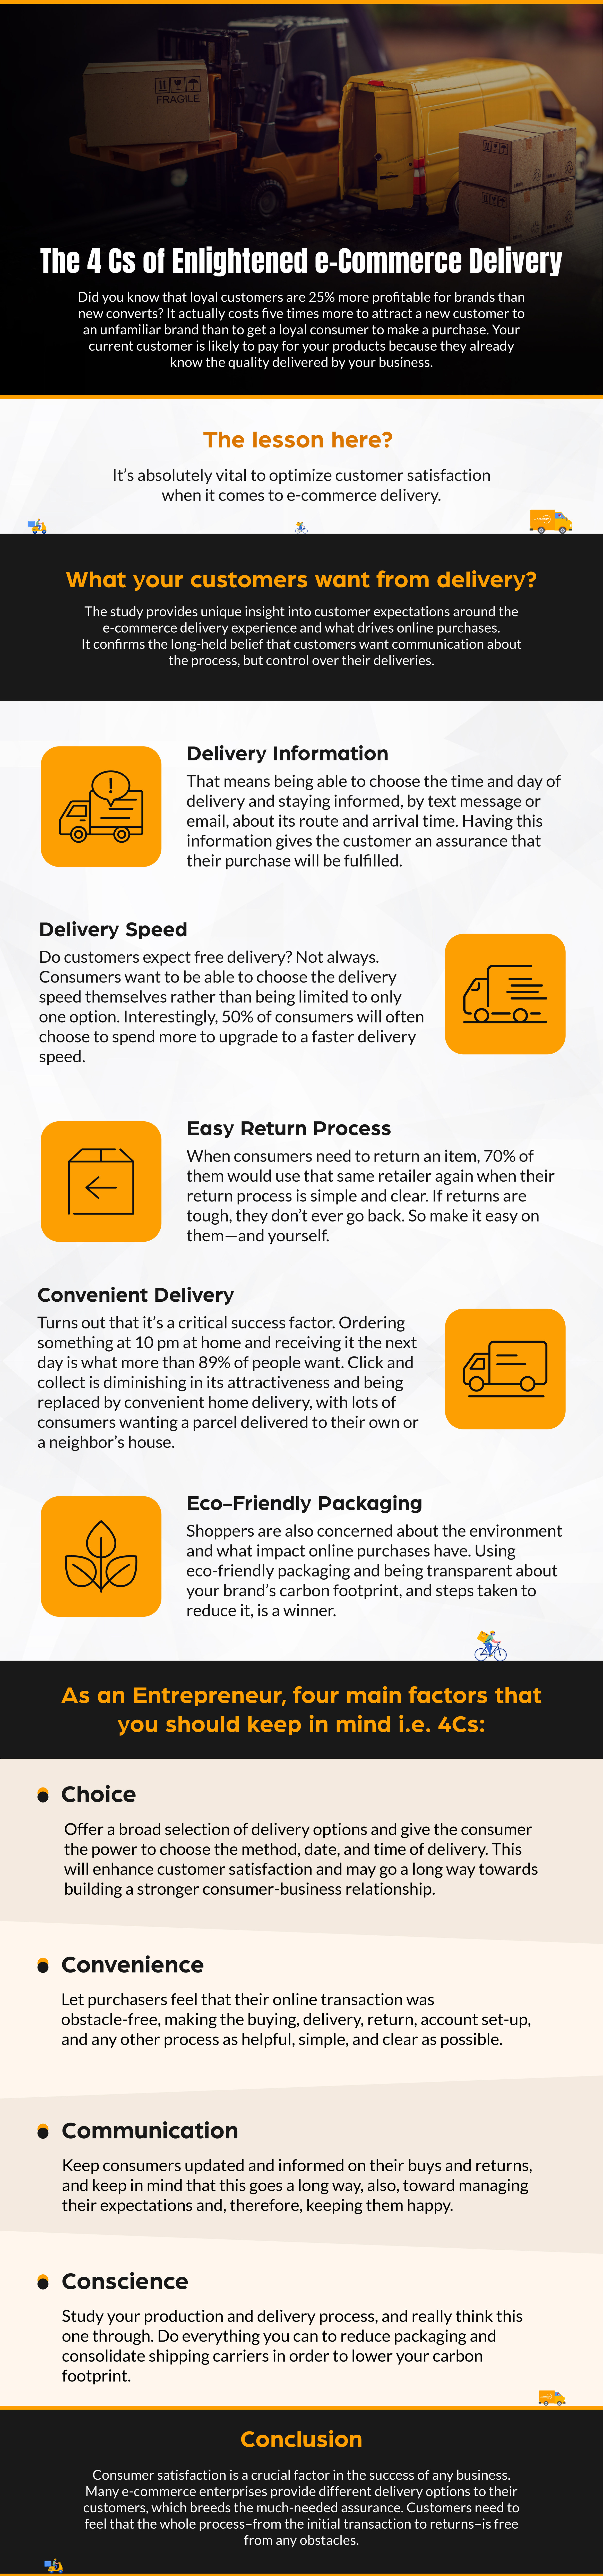 4Cs of eCommerce Delivery